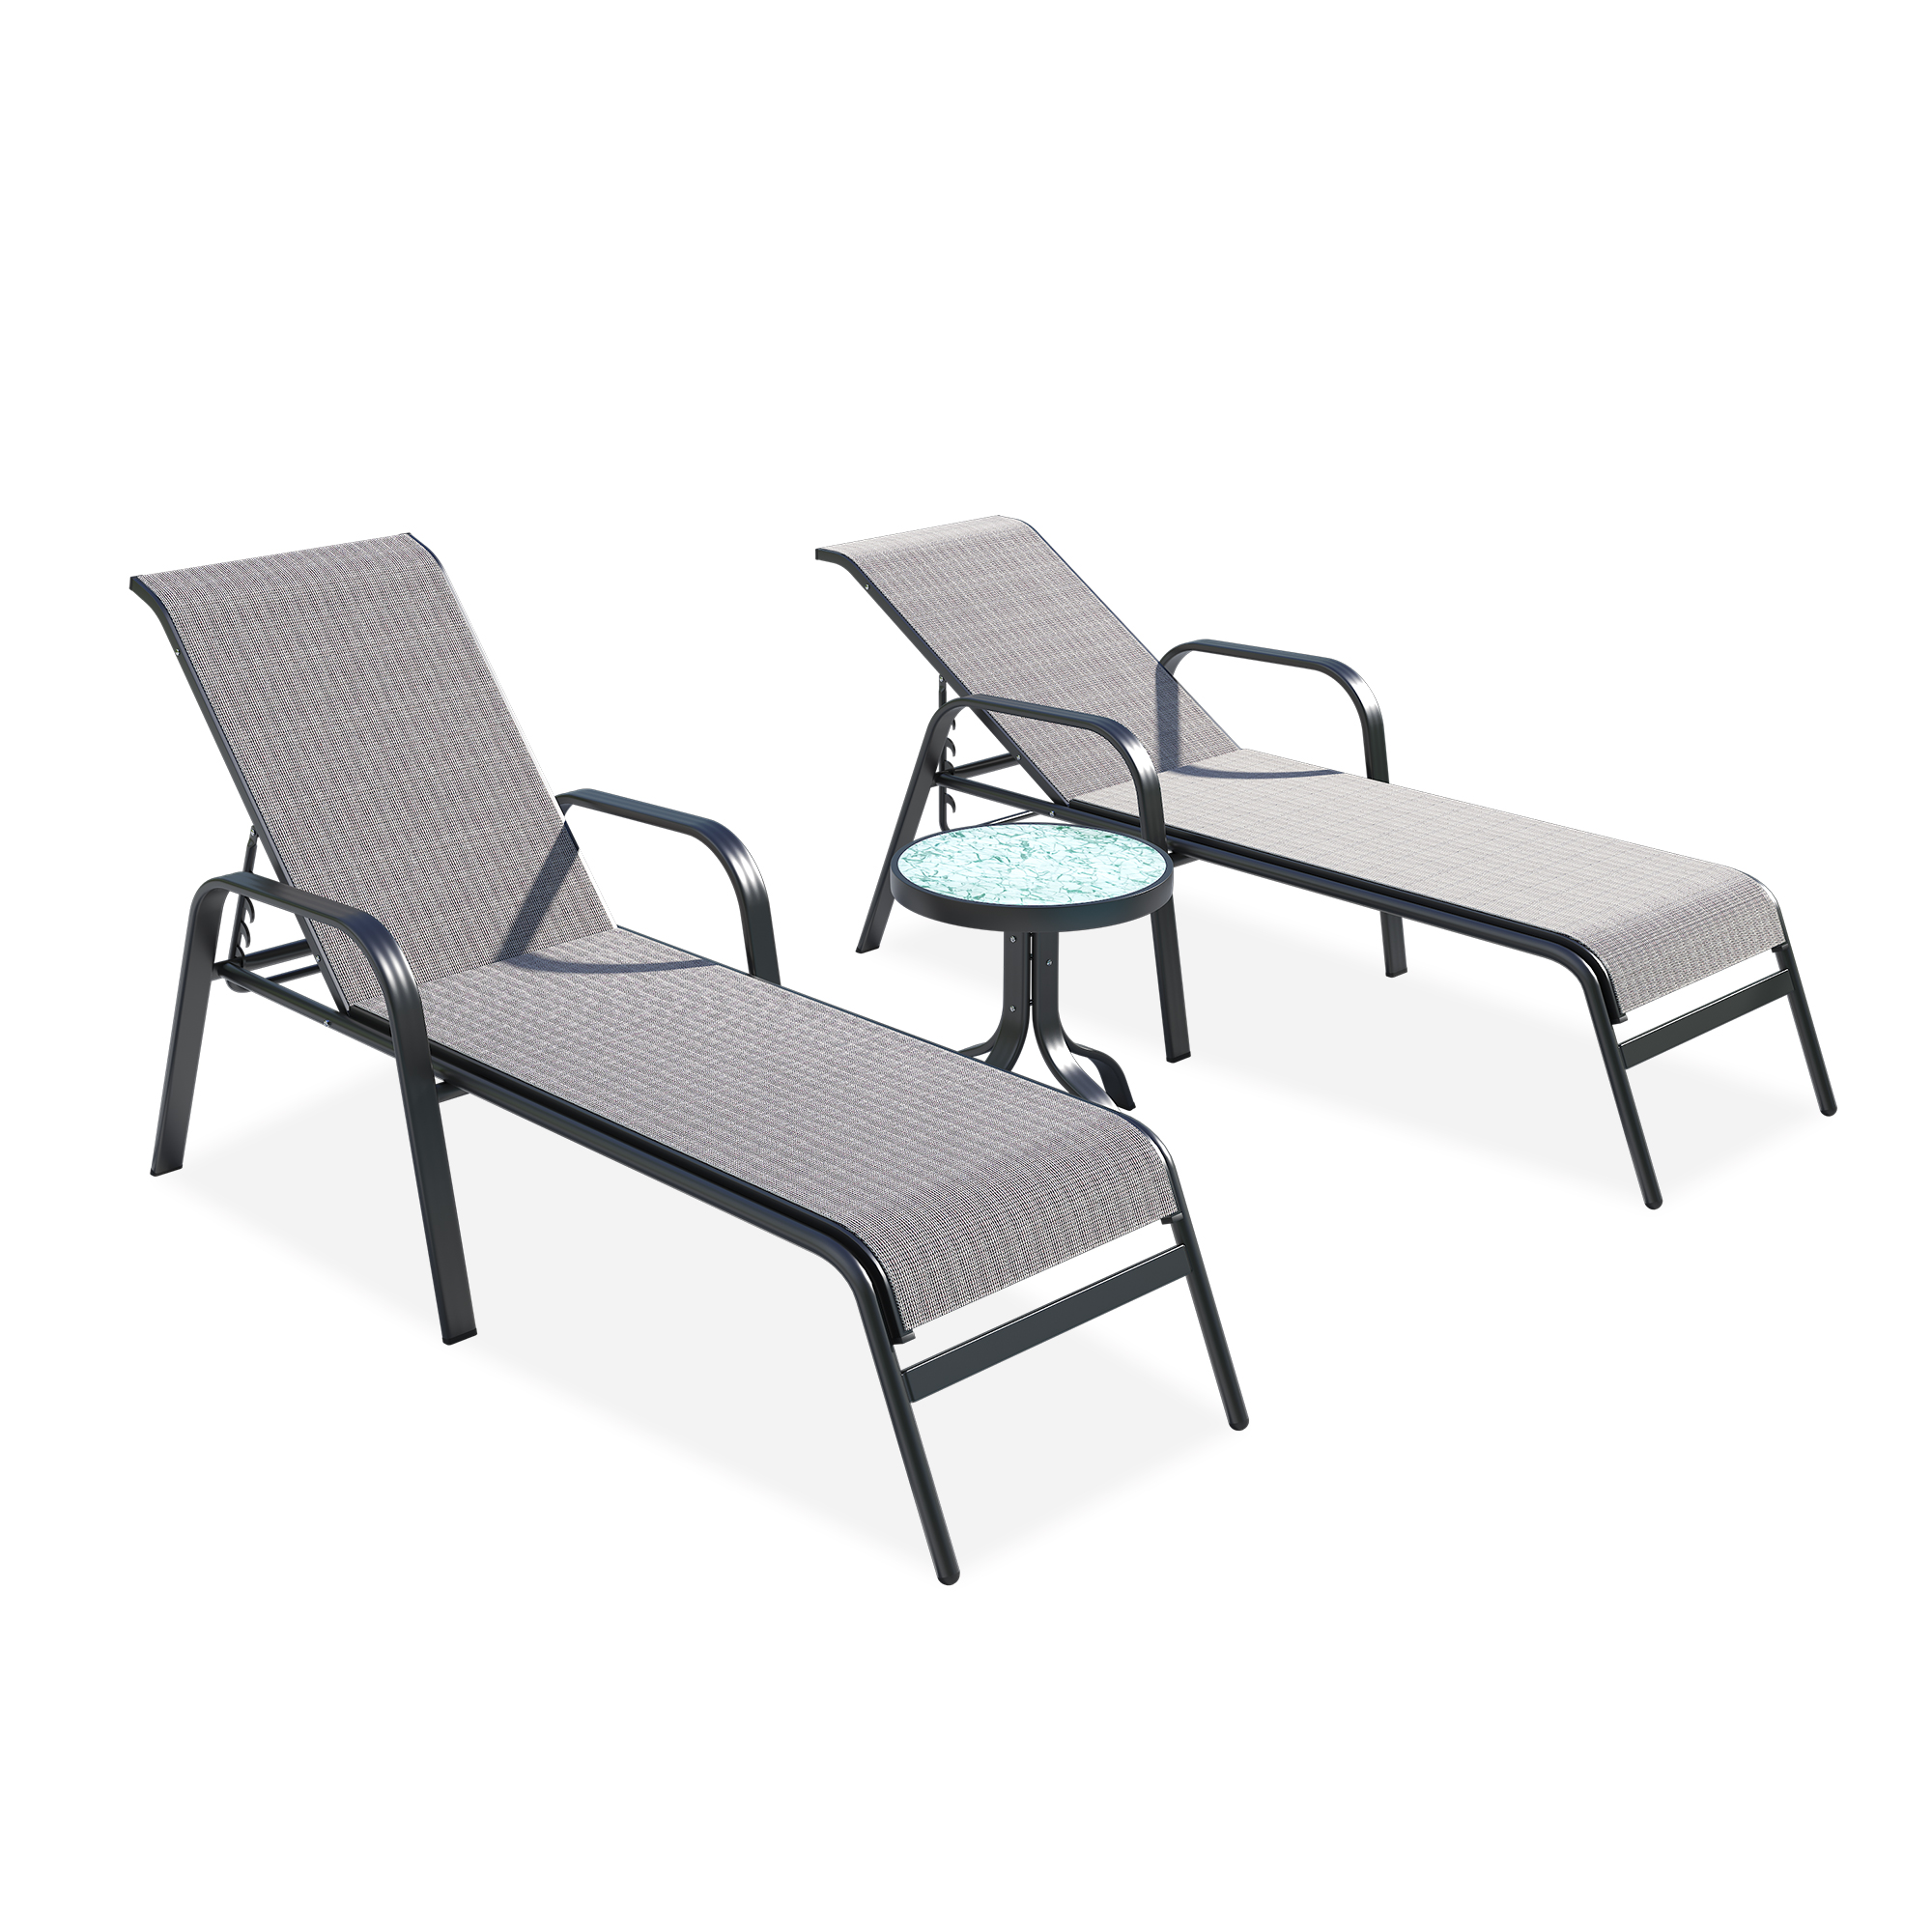 Garden furniture folding beach swimming chaise lounge chairs pool outdoor sun lounger